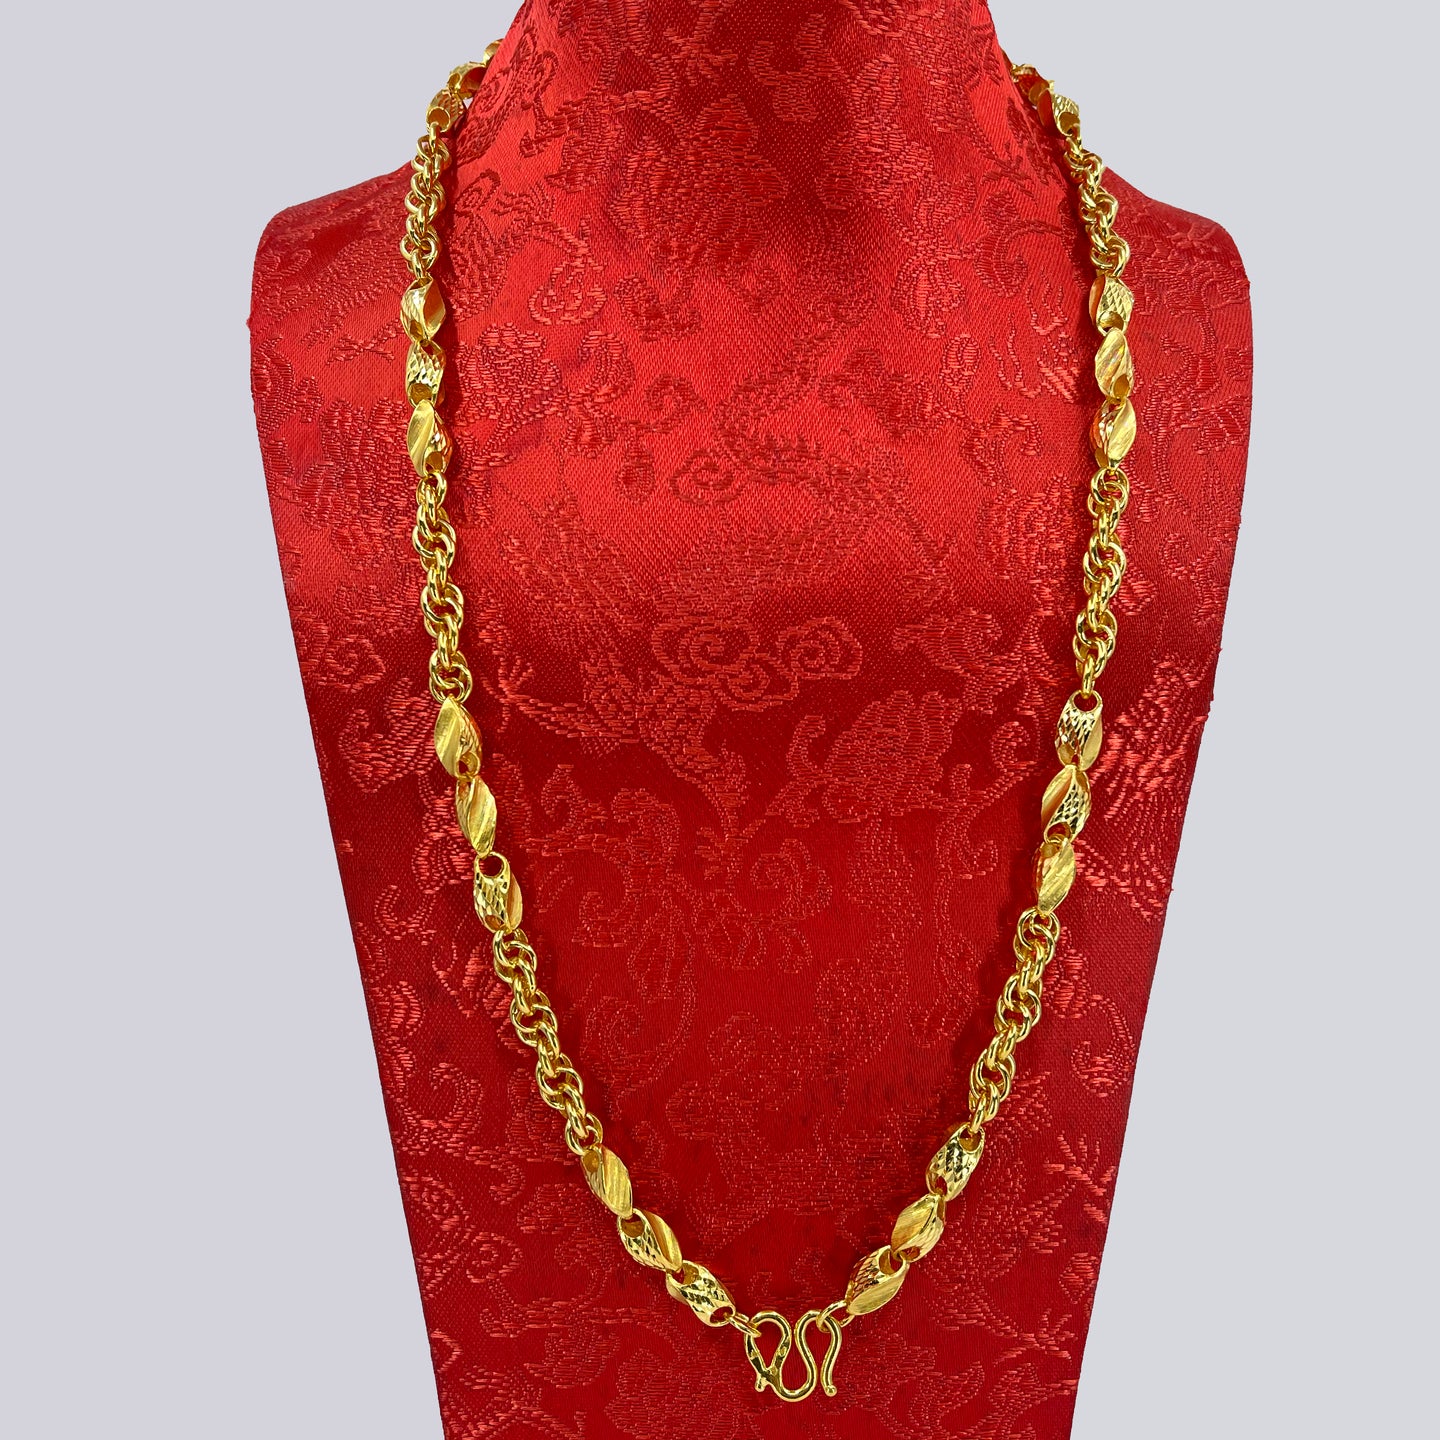 24K Solid Yellow Gold Barrel Link Chain 61.3 Grams 24